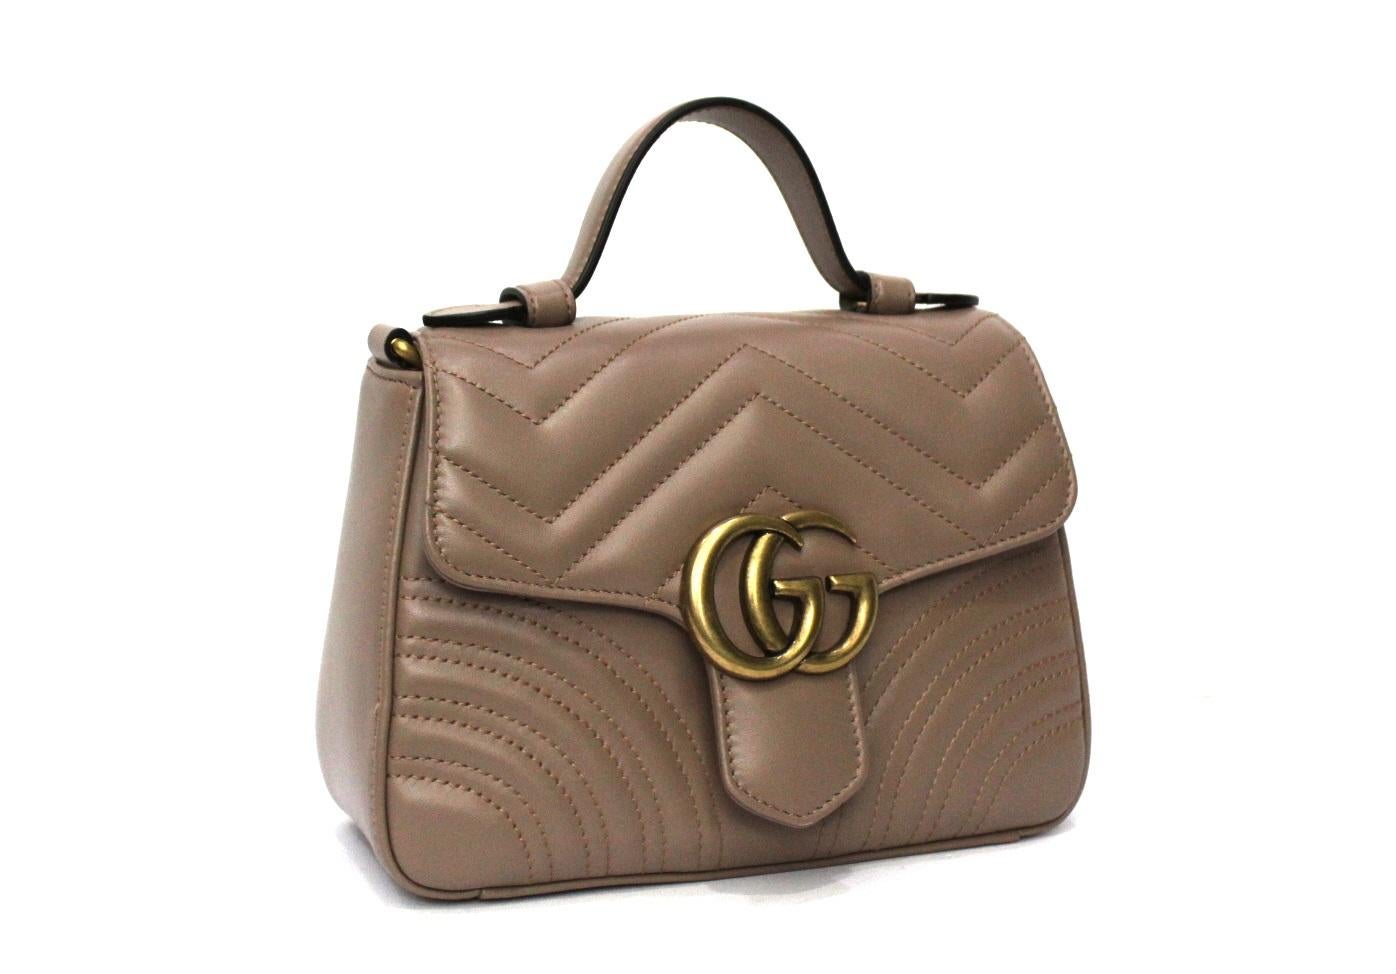 Gucci Marmont bag made of mud matelassé leather with chevron motif. Antique gold hardware. The bag is equipped with a removable shoulder strap, in fact it can also be carried as a small handbag. Hook closure, internally capacious for the essentials.